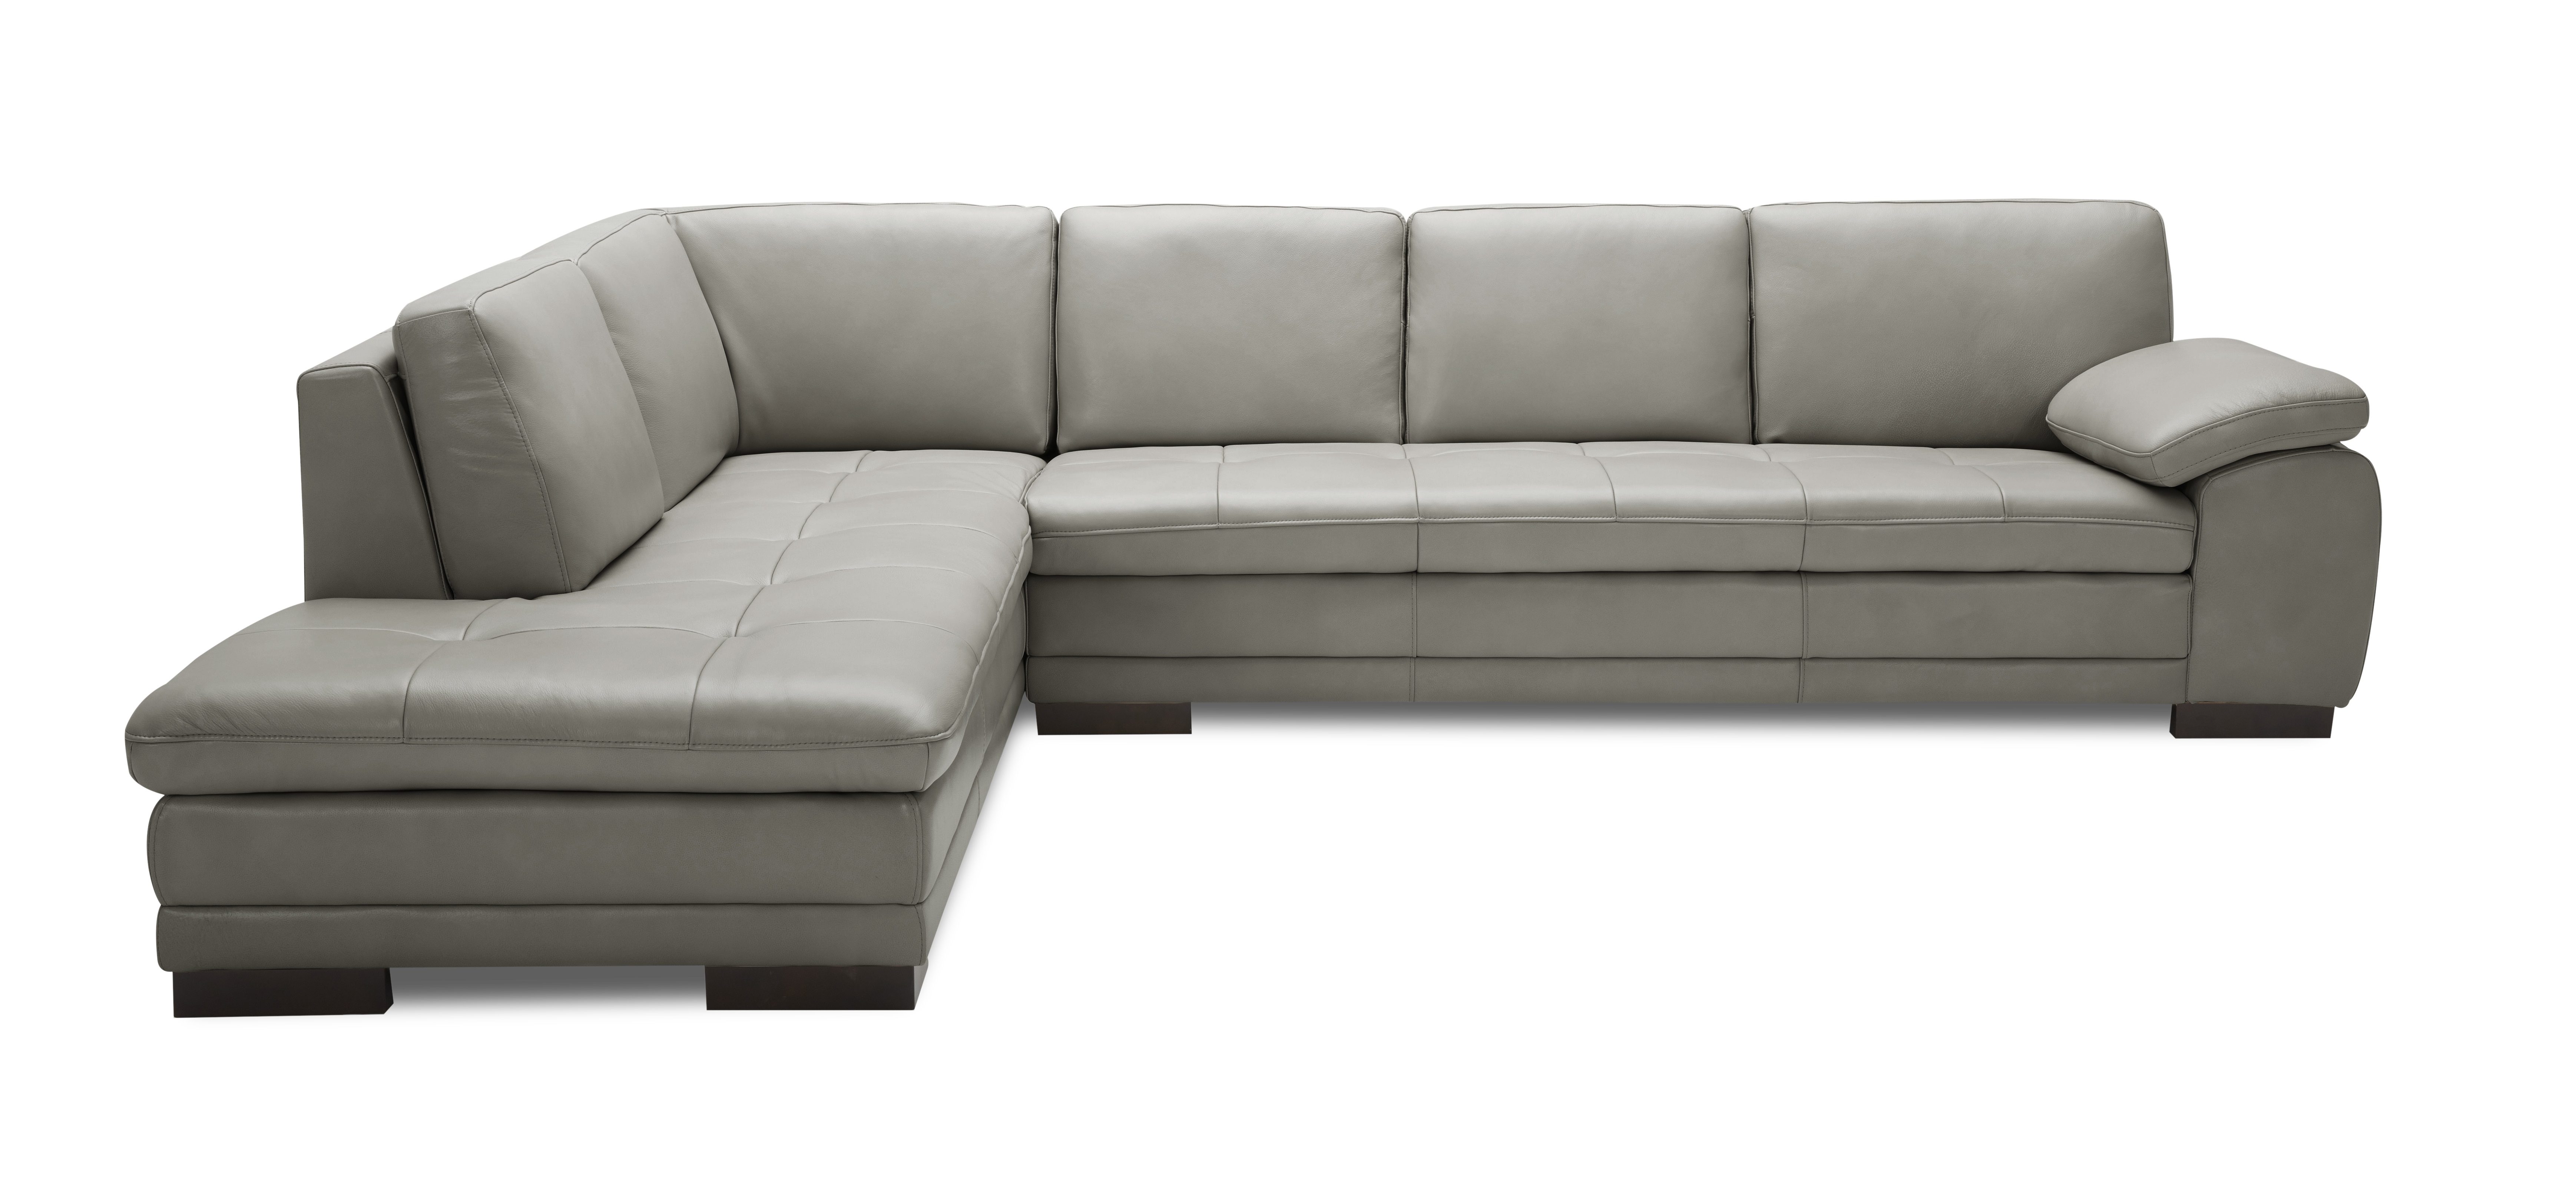 italian leather blue cupholder sectional sofa